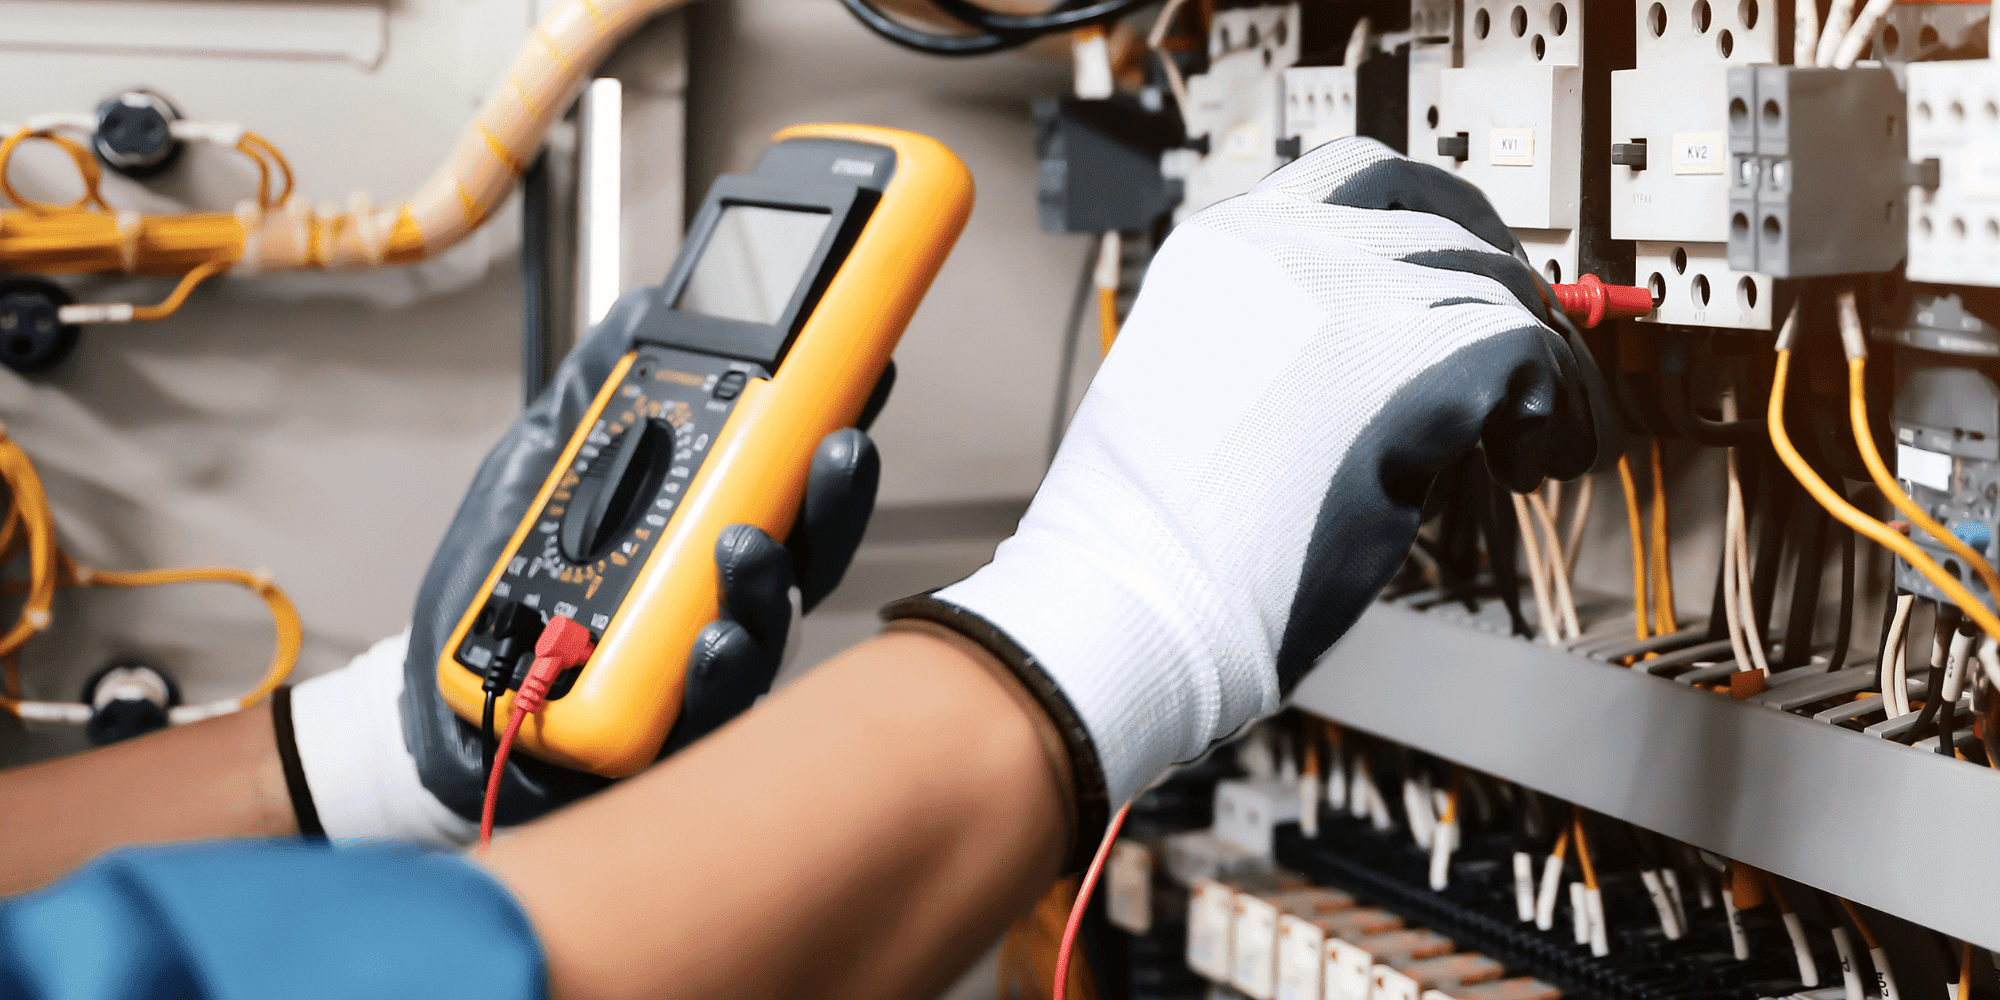 Electrical Person Wearing Safety Gloves Testing Wires 1 Aspect Ratio 1160 580